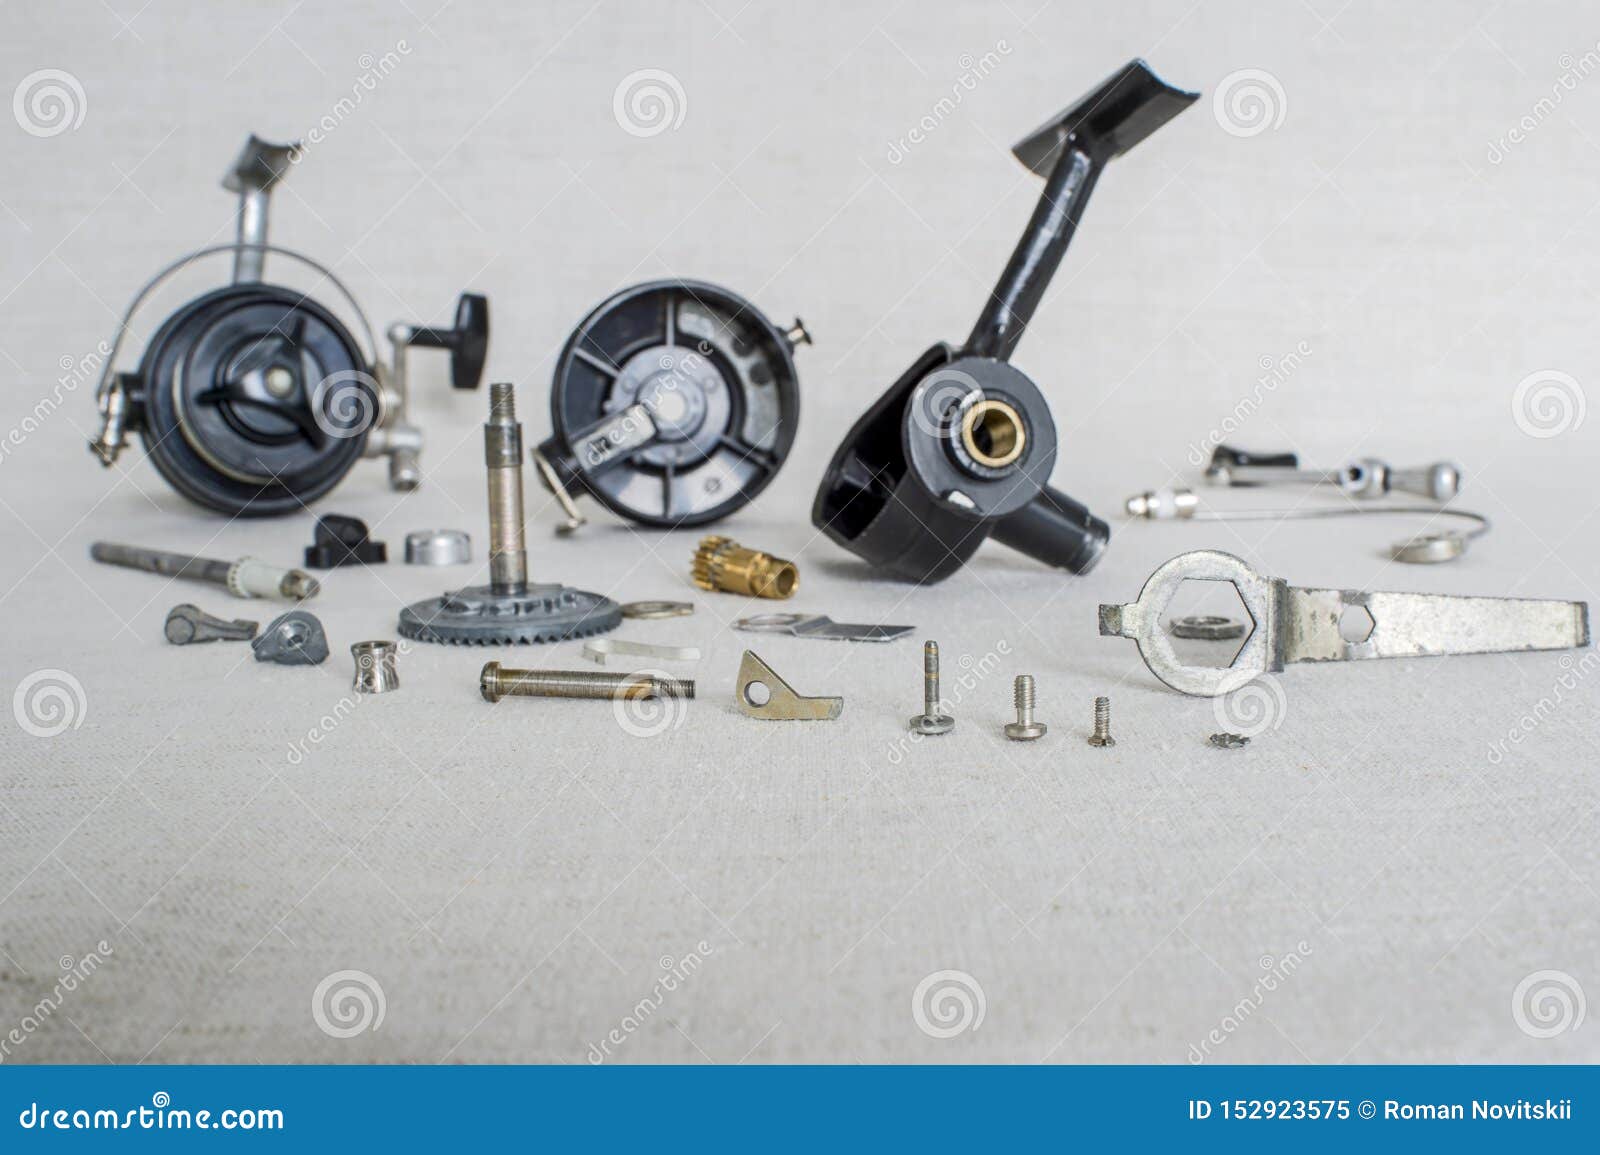 https://thumbs.dreamstime.com/z/fishing-spinning-reel-as-whole-second-similar-completely-disassembled-concept-parts-preparation-season-prevention-152923575.jpg